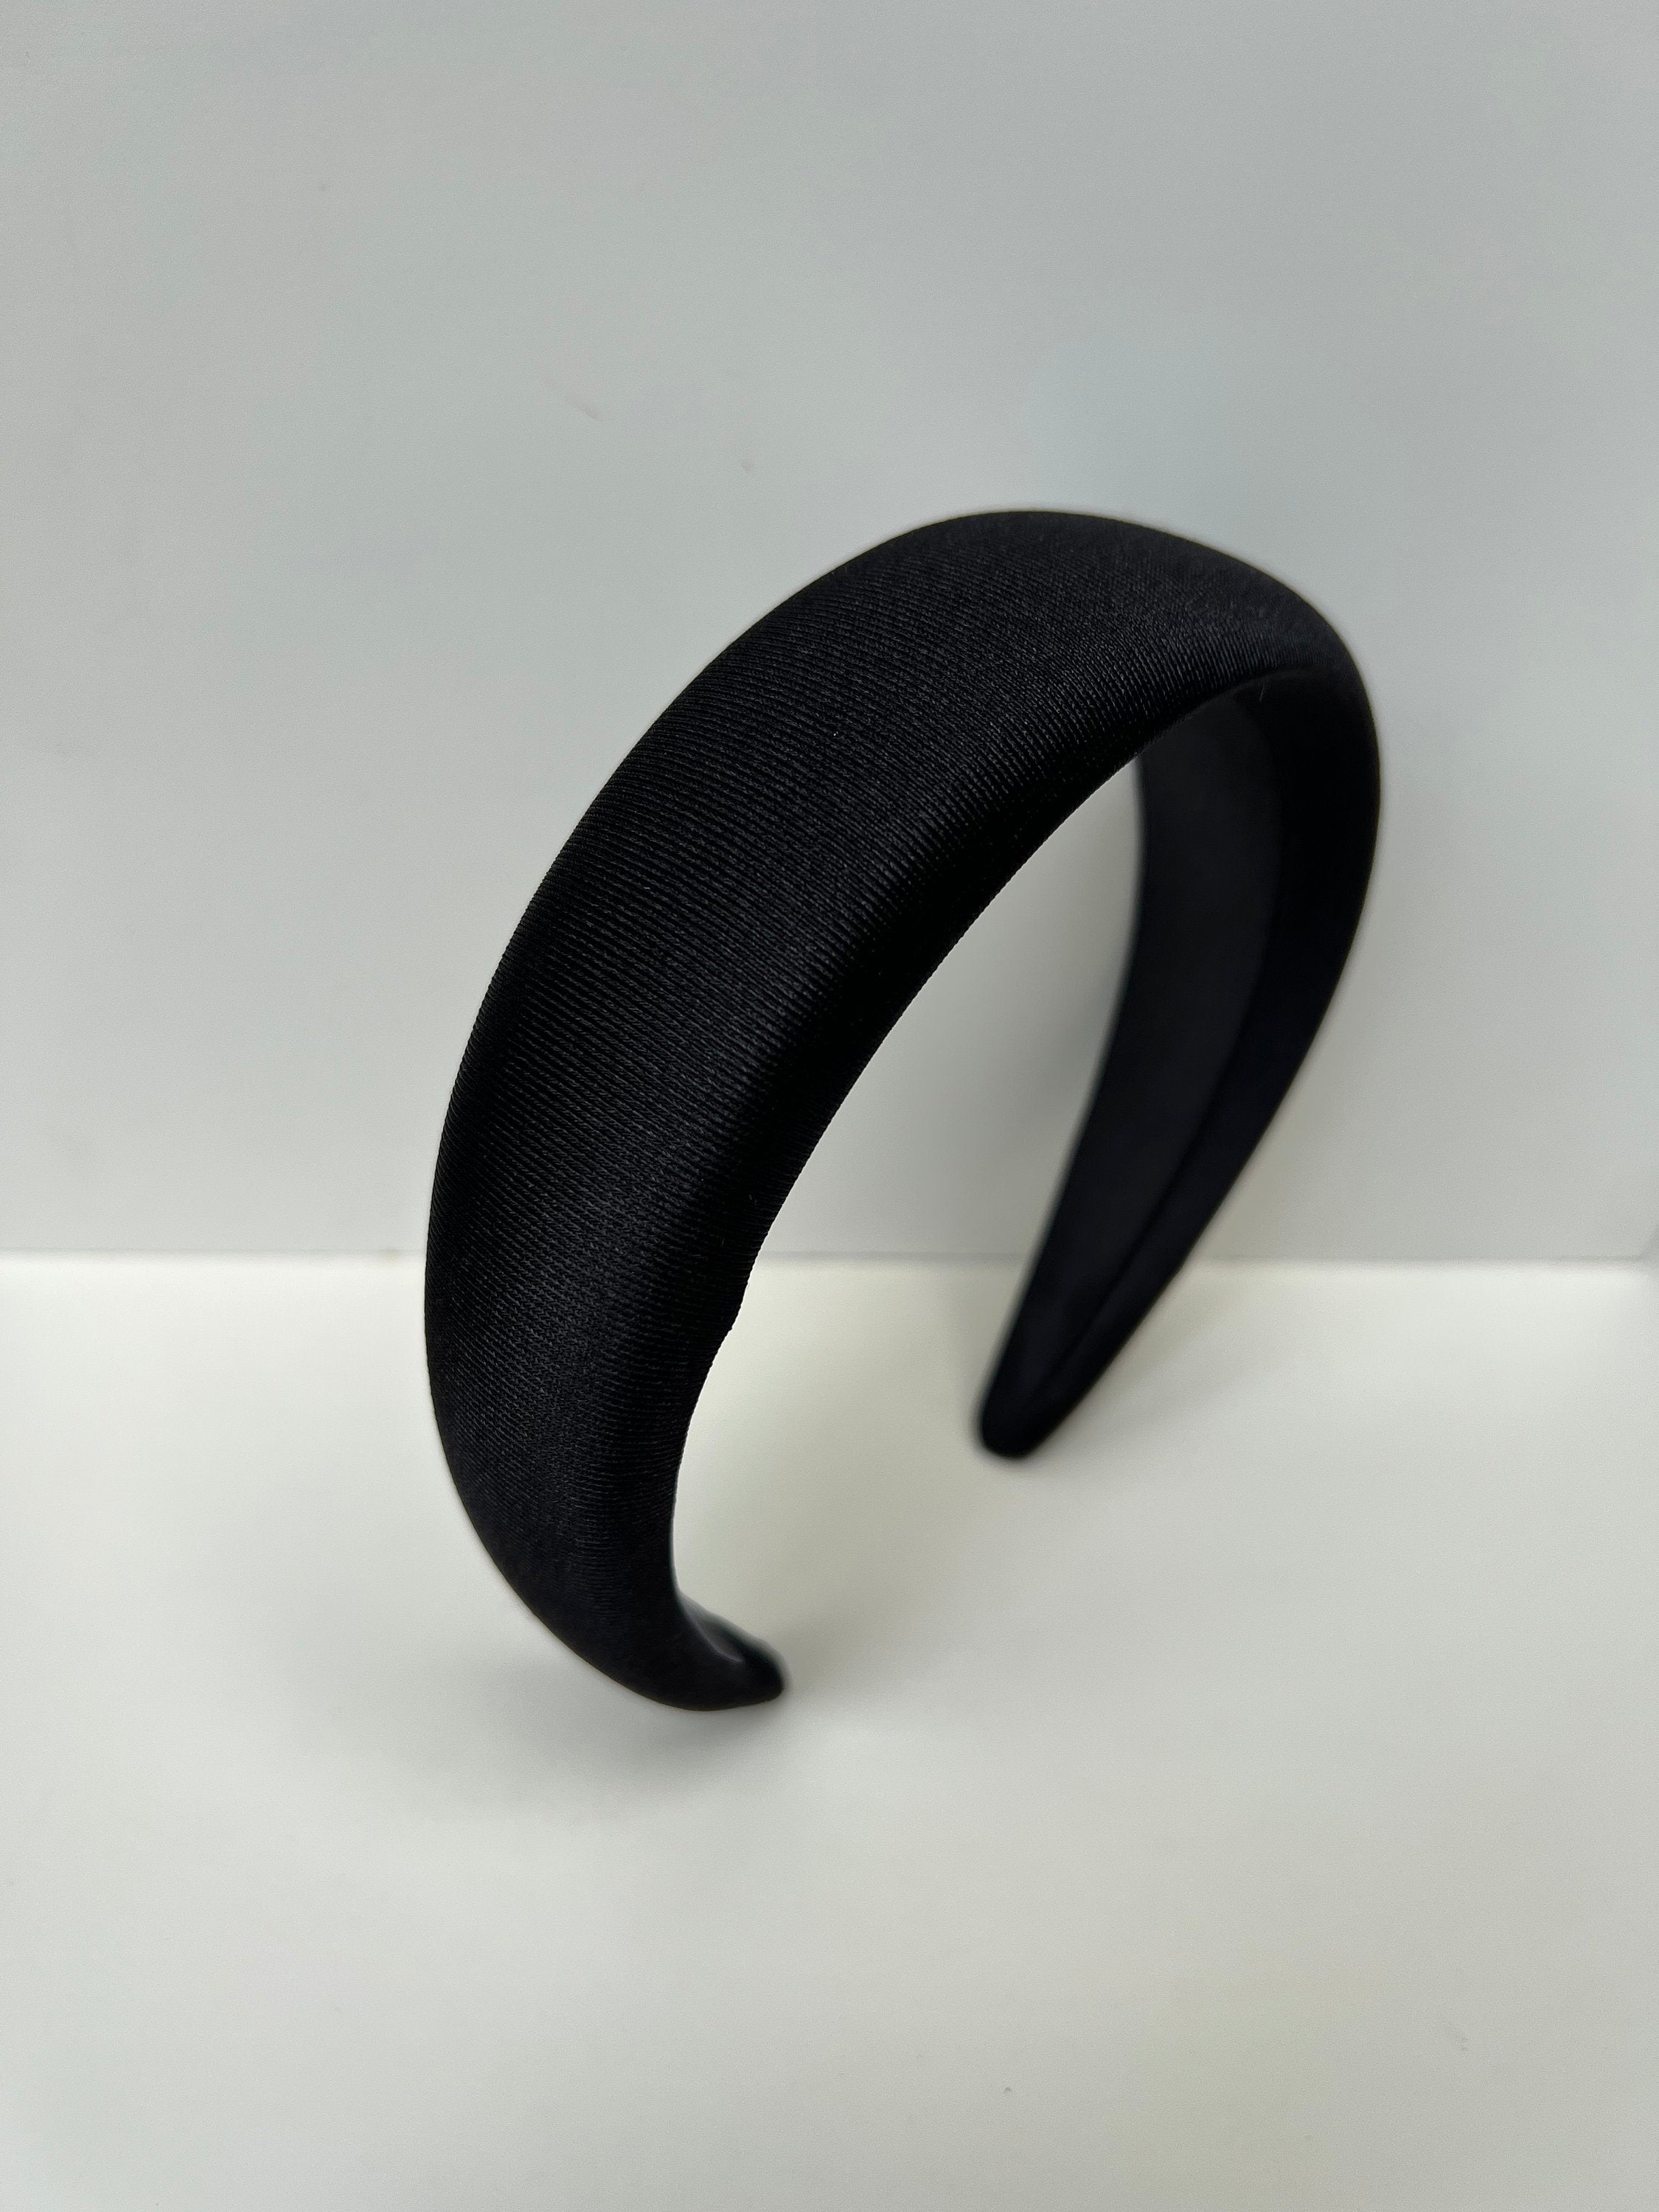 Add some sophistication to your hair with these black satin headbands, perfect for everyday elegance or special occasions.